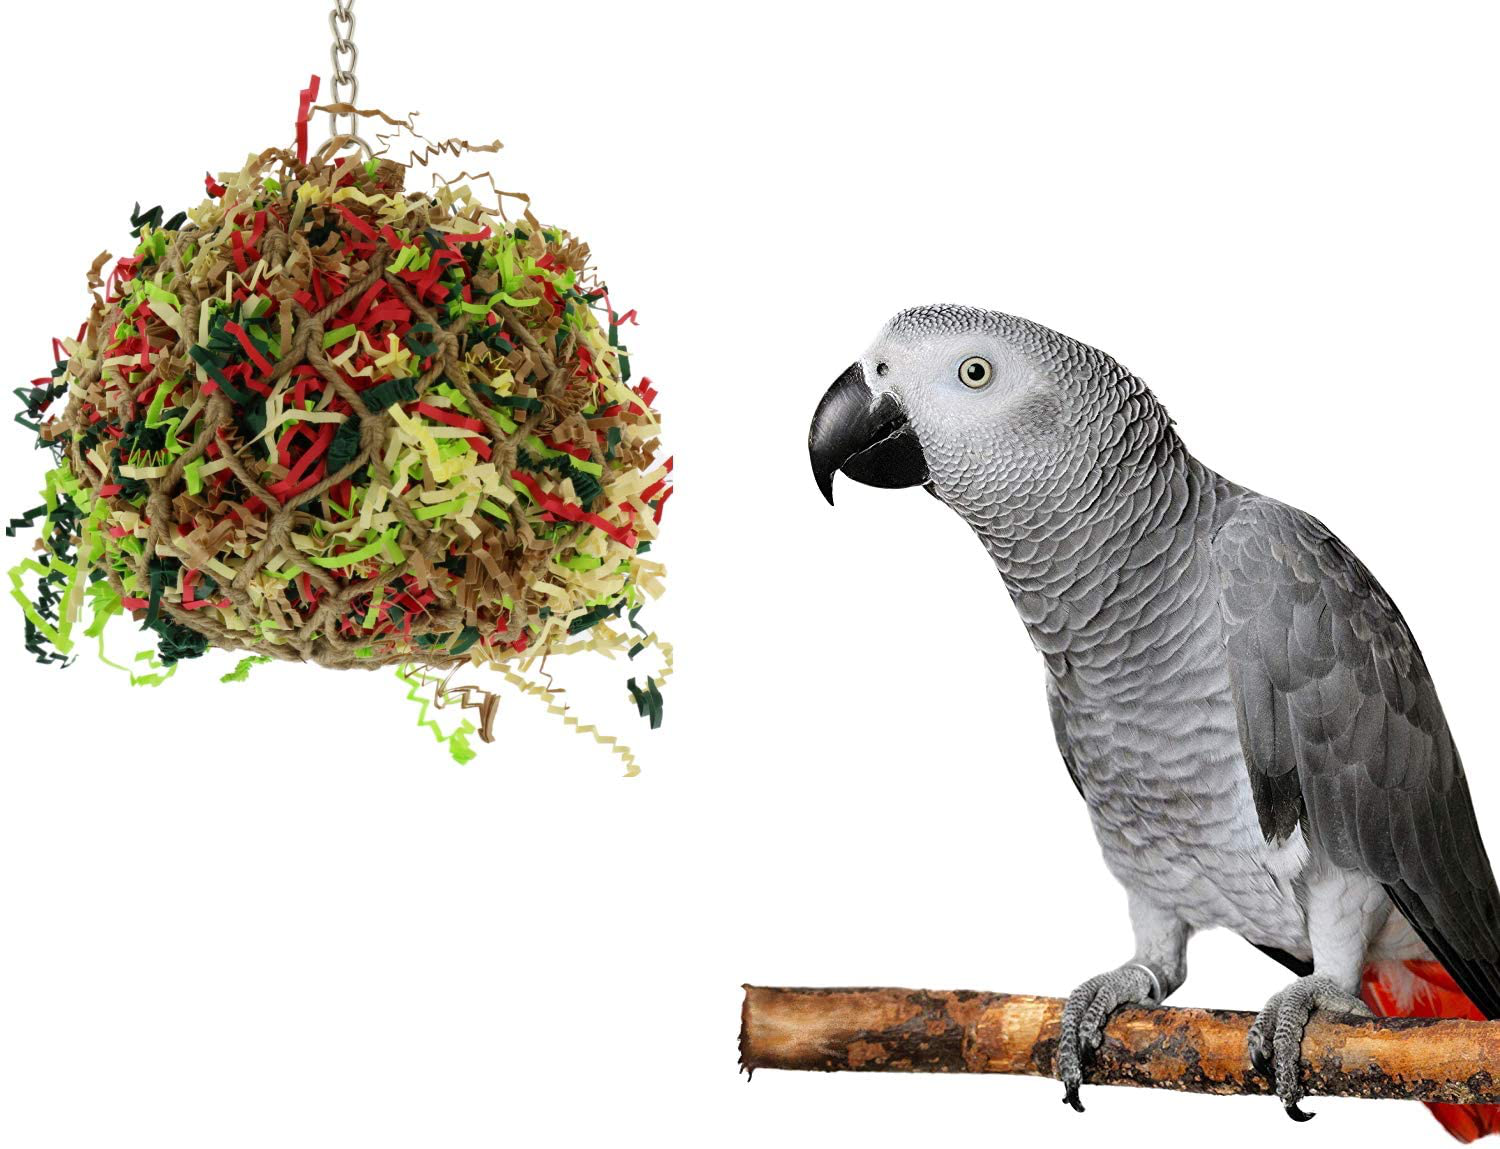 Sweet Feet and Beak Super Shredder Ball - Bird Cage Accessories to Keep Your Bird Busy Foraging for Hidden Treasures - Non-Toxic, Easy to Install Bird Foraging Toys, Bird Treats, Parrot Toys